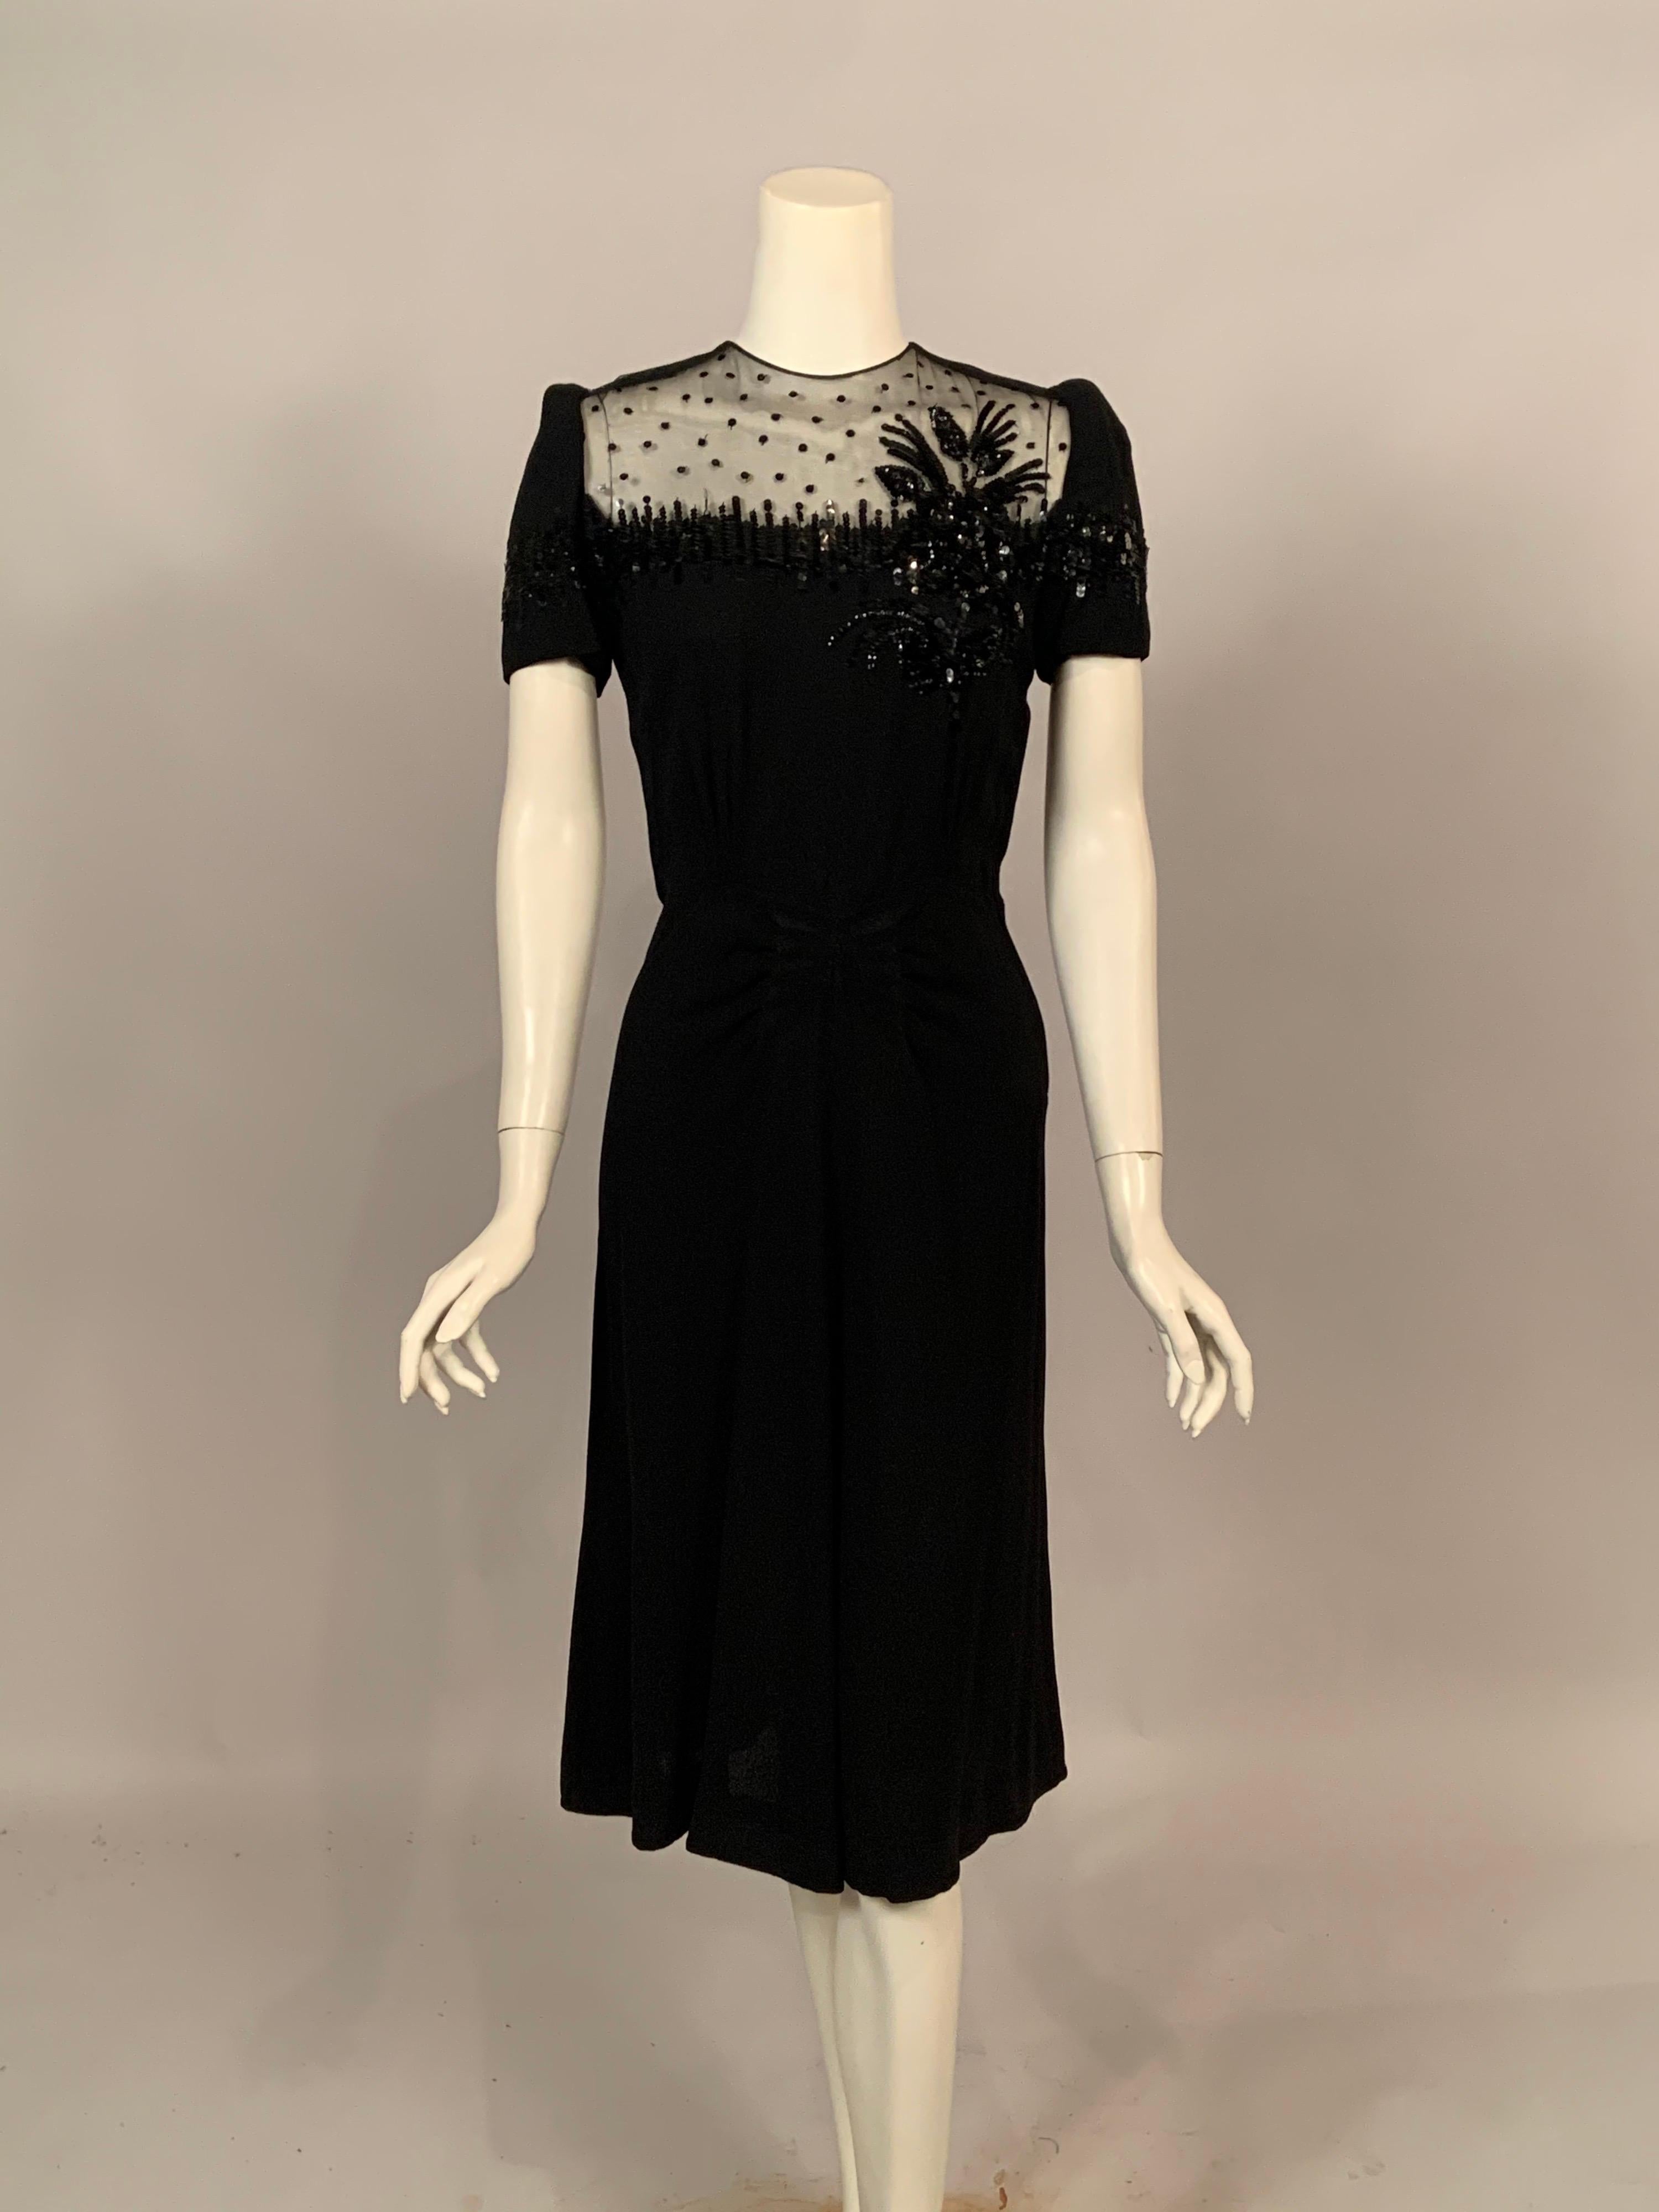 A truly glamorous black crepe dress with a sheer panel embellished with scattered sequins, vertical rows of  black sequins on the sleeves and bustline and a beautiful three dimensional floral corsage on the left side. The dress has three vertical